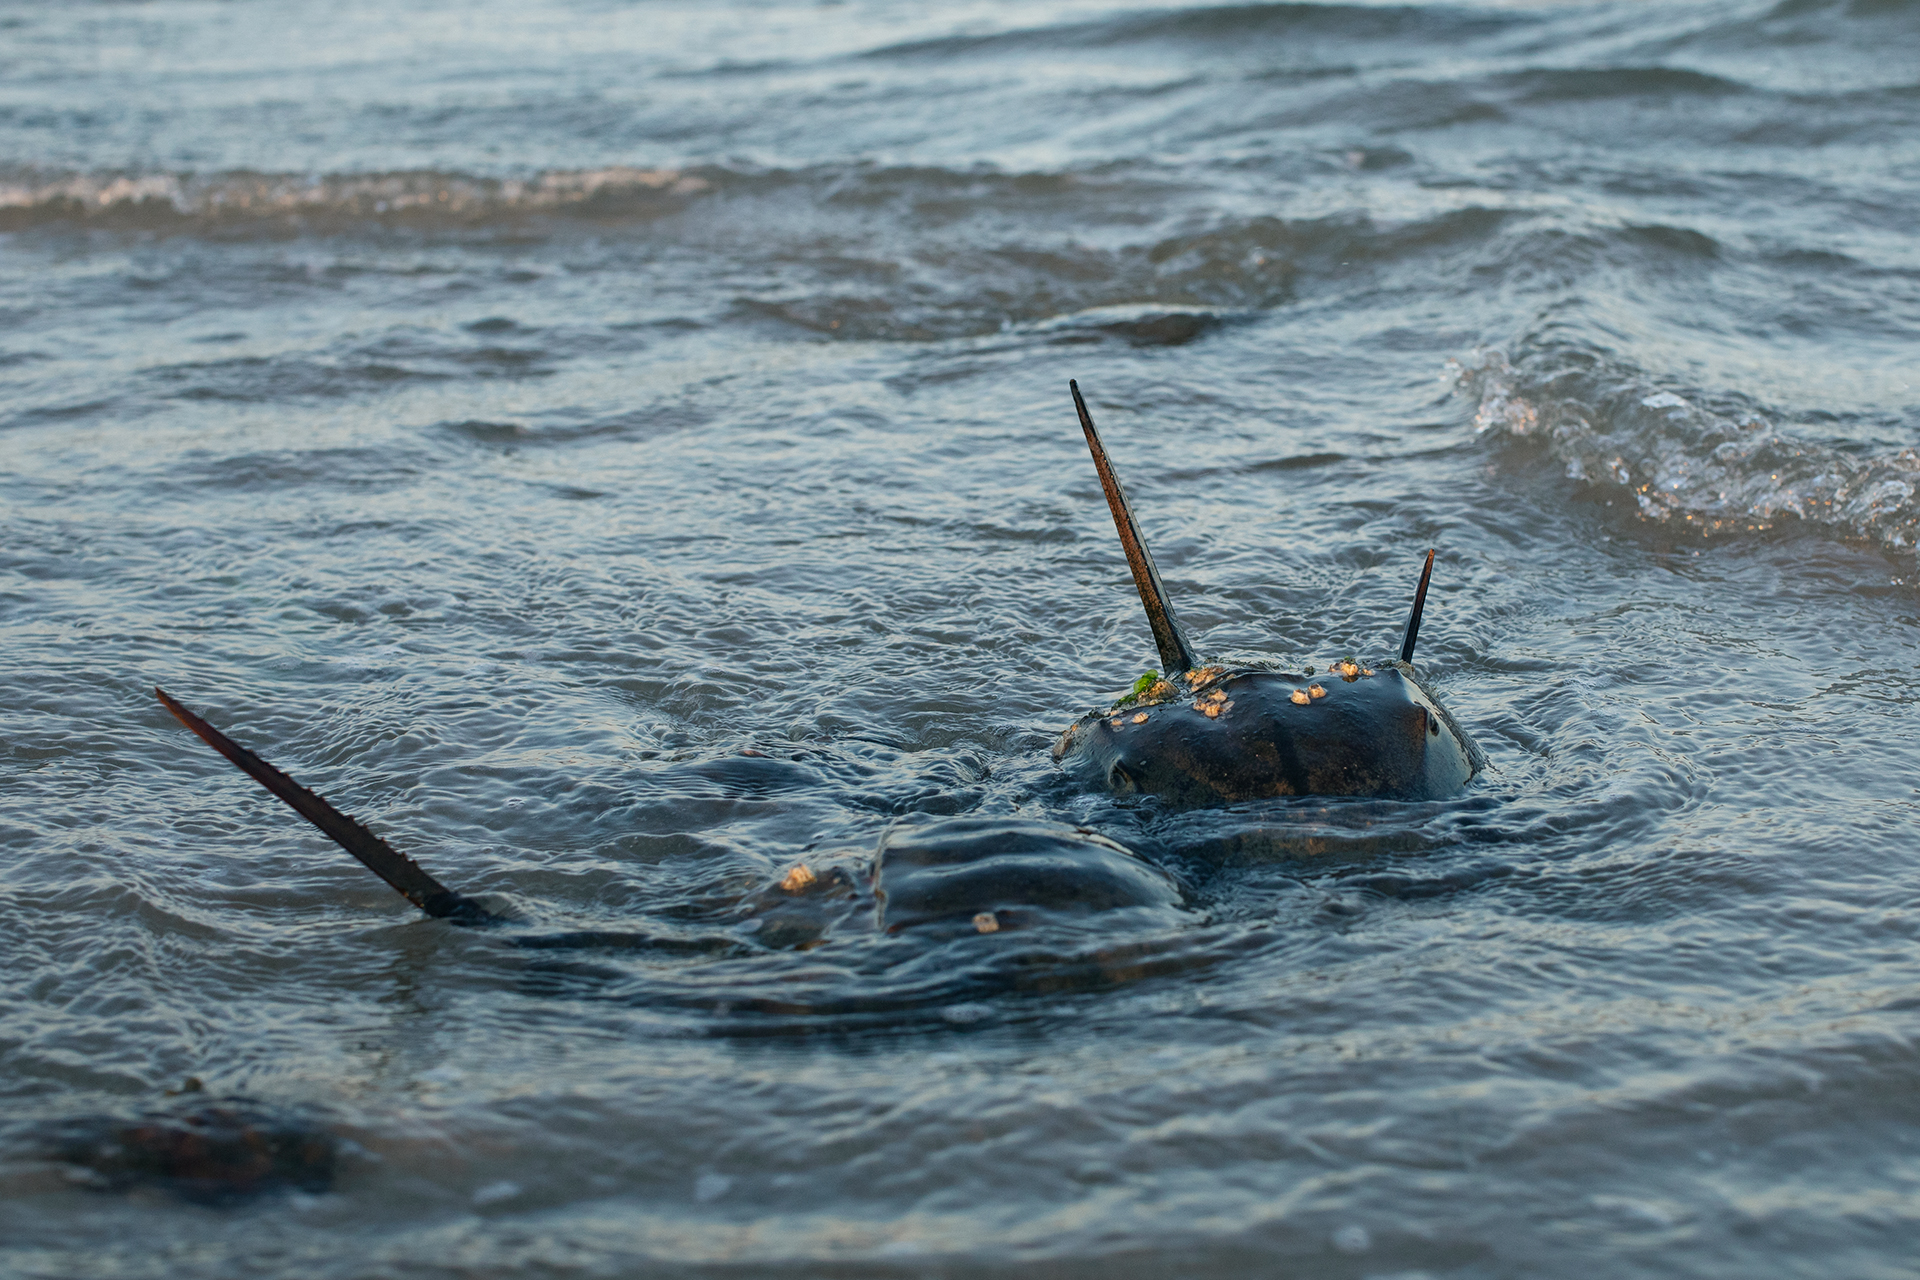 A few horseshoe crabs swimming with their tail spines pointing out of the water.